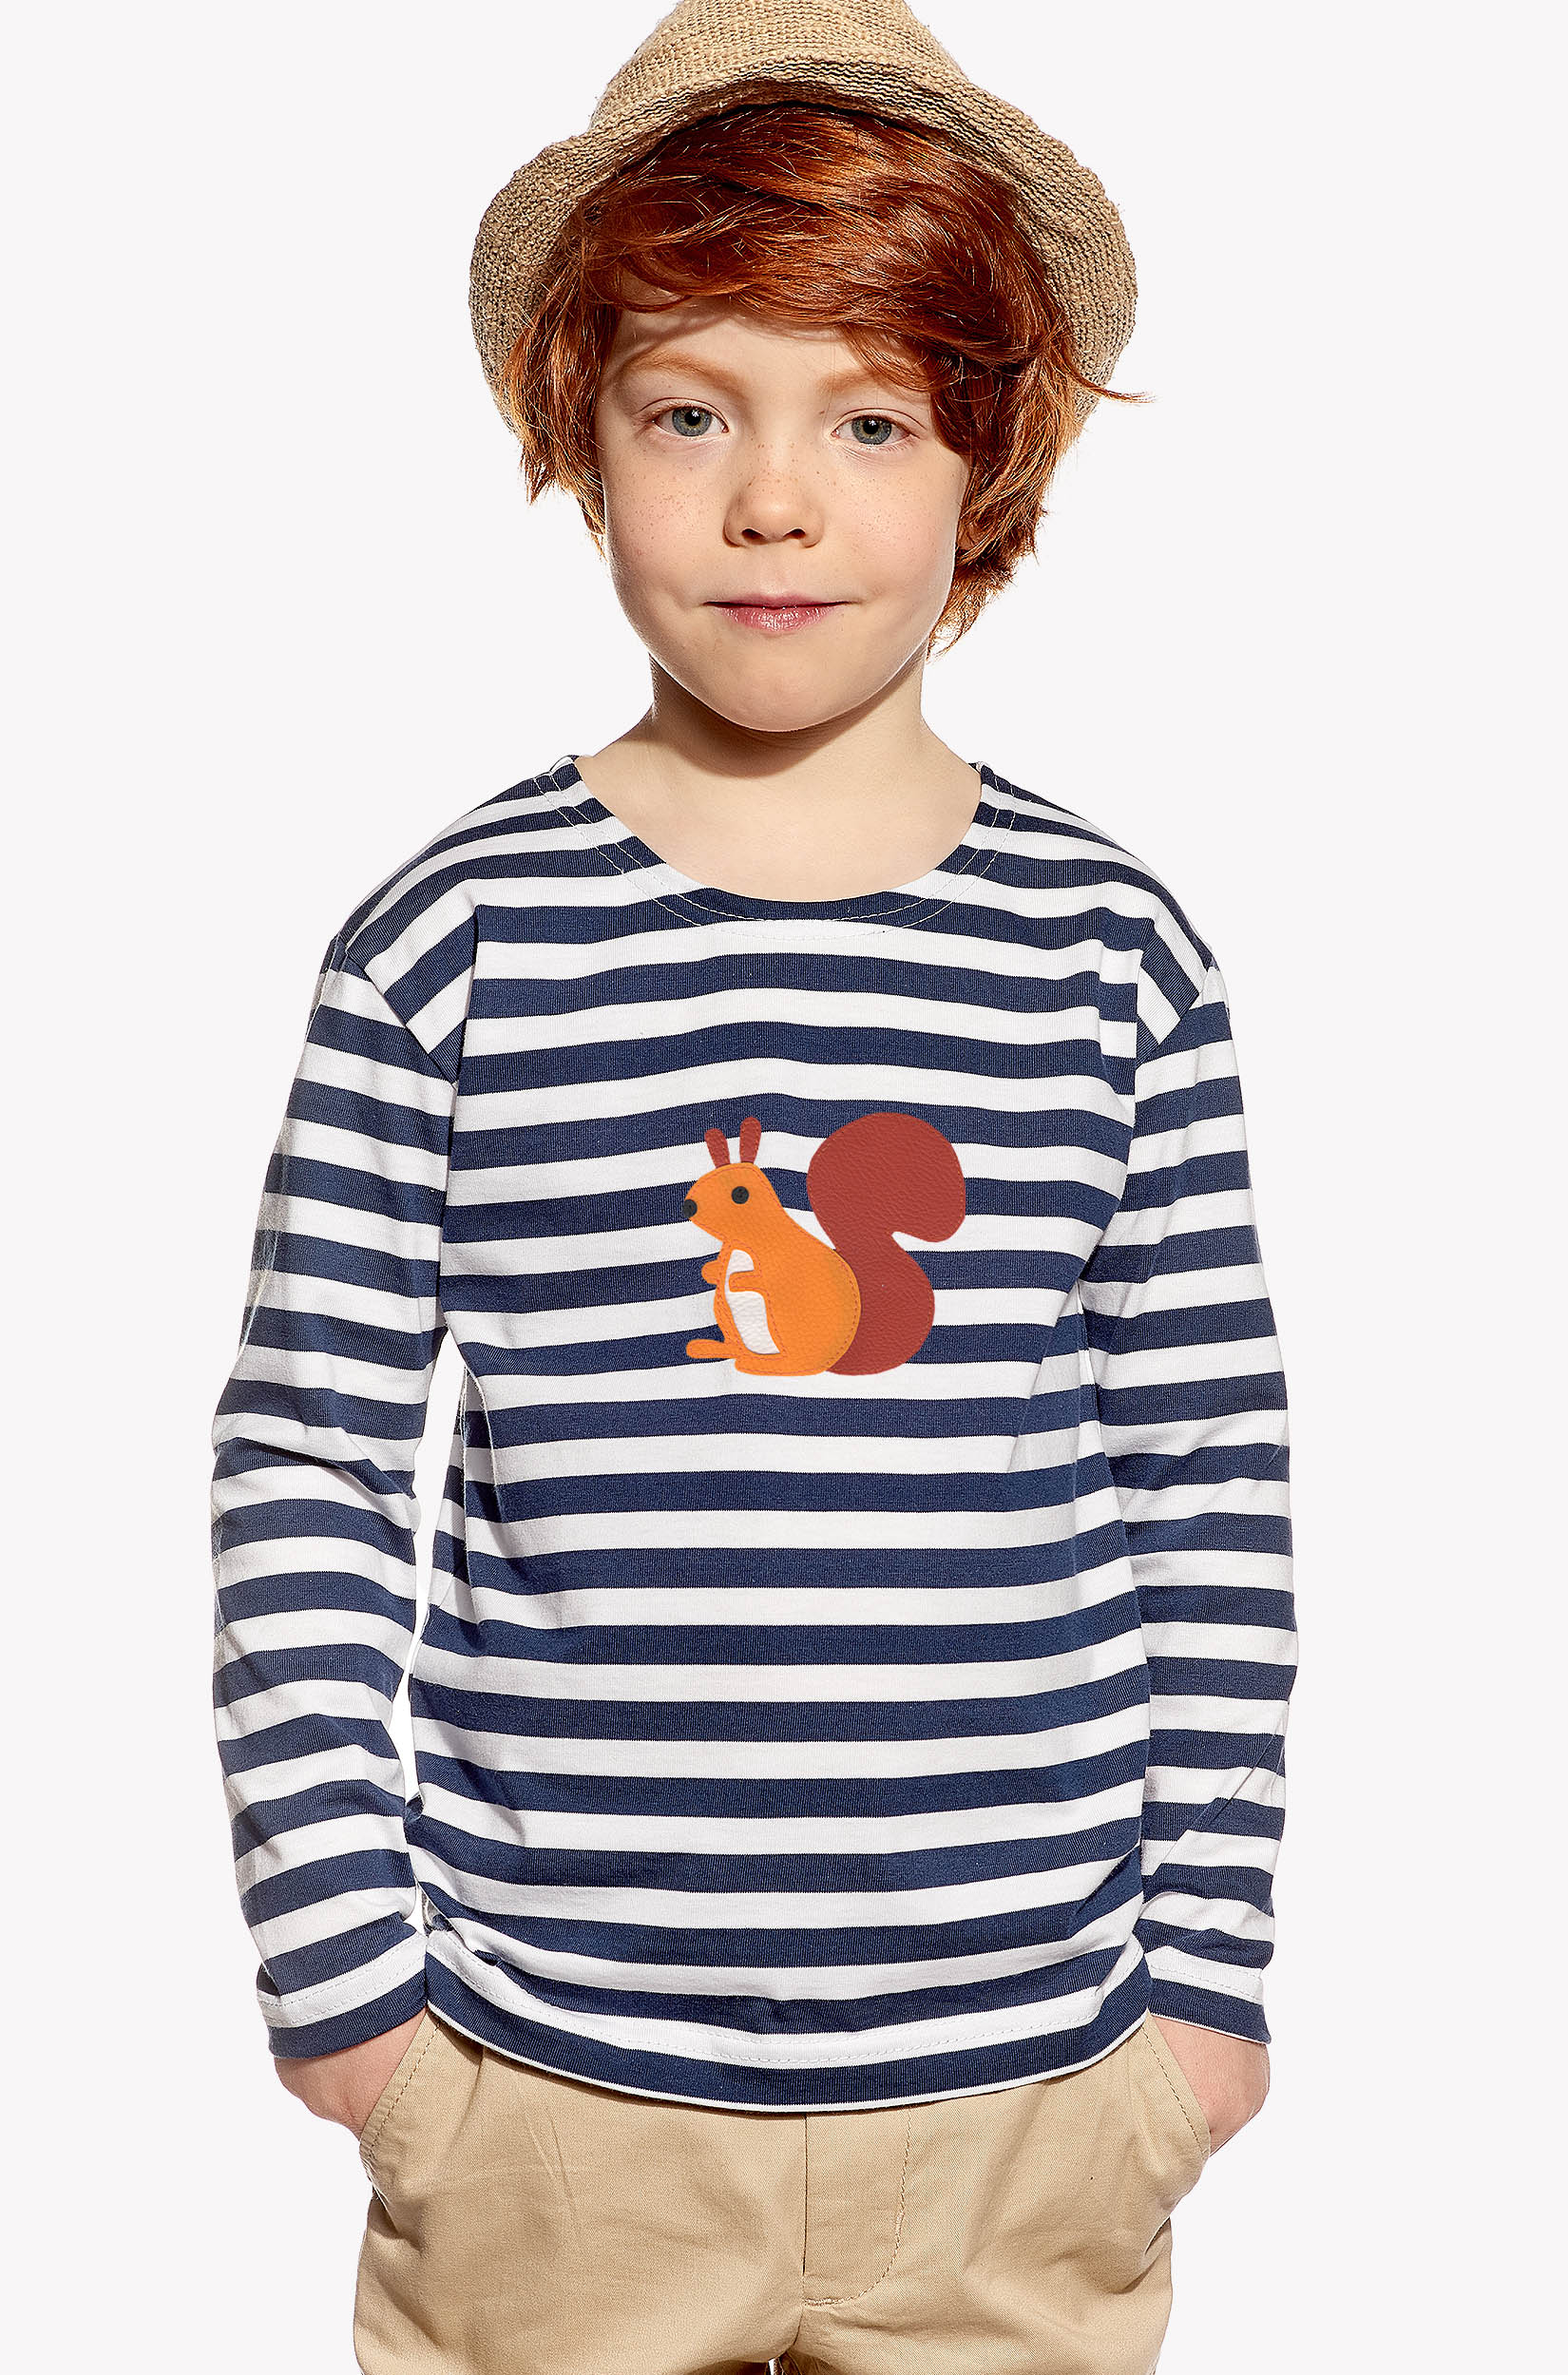 Shirt with squirrel